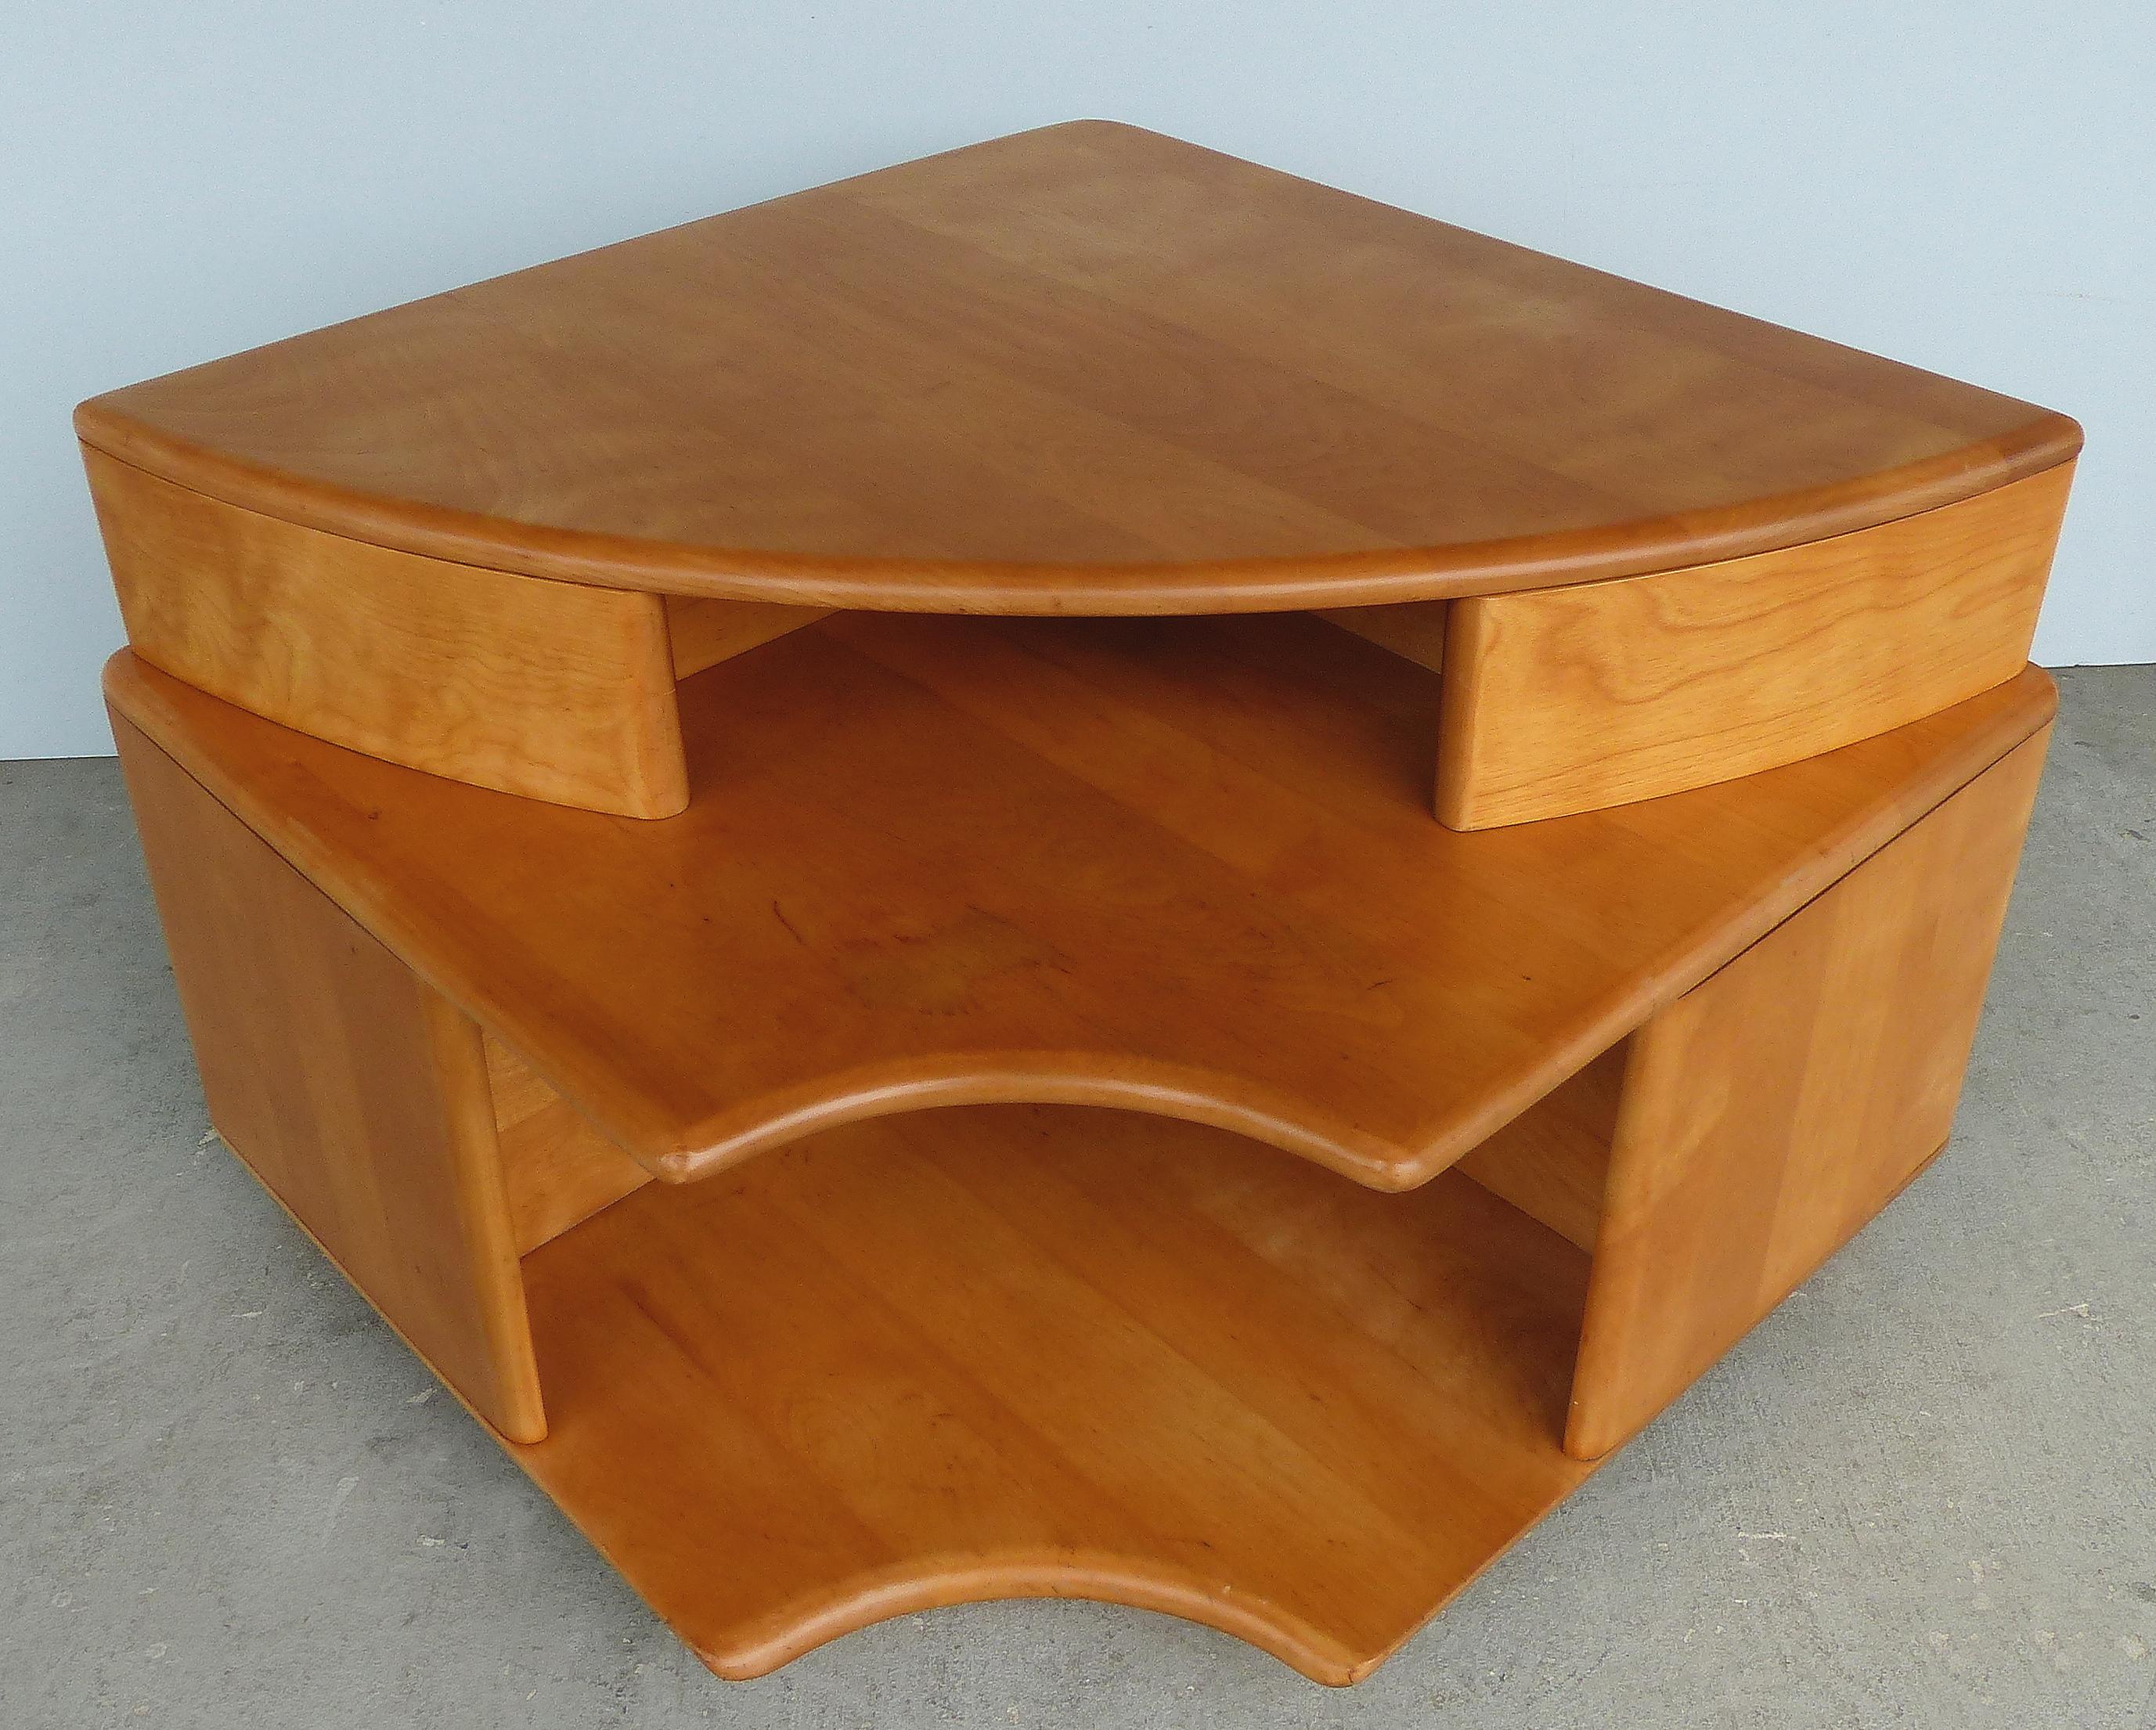 Mid-Century Modern Blonde Wood Corner Table

Offered for sale is a Mid-Century Modern blonde wood corner table. This unusual table has several tiers that would be great to store books and magazines.